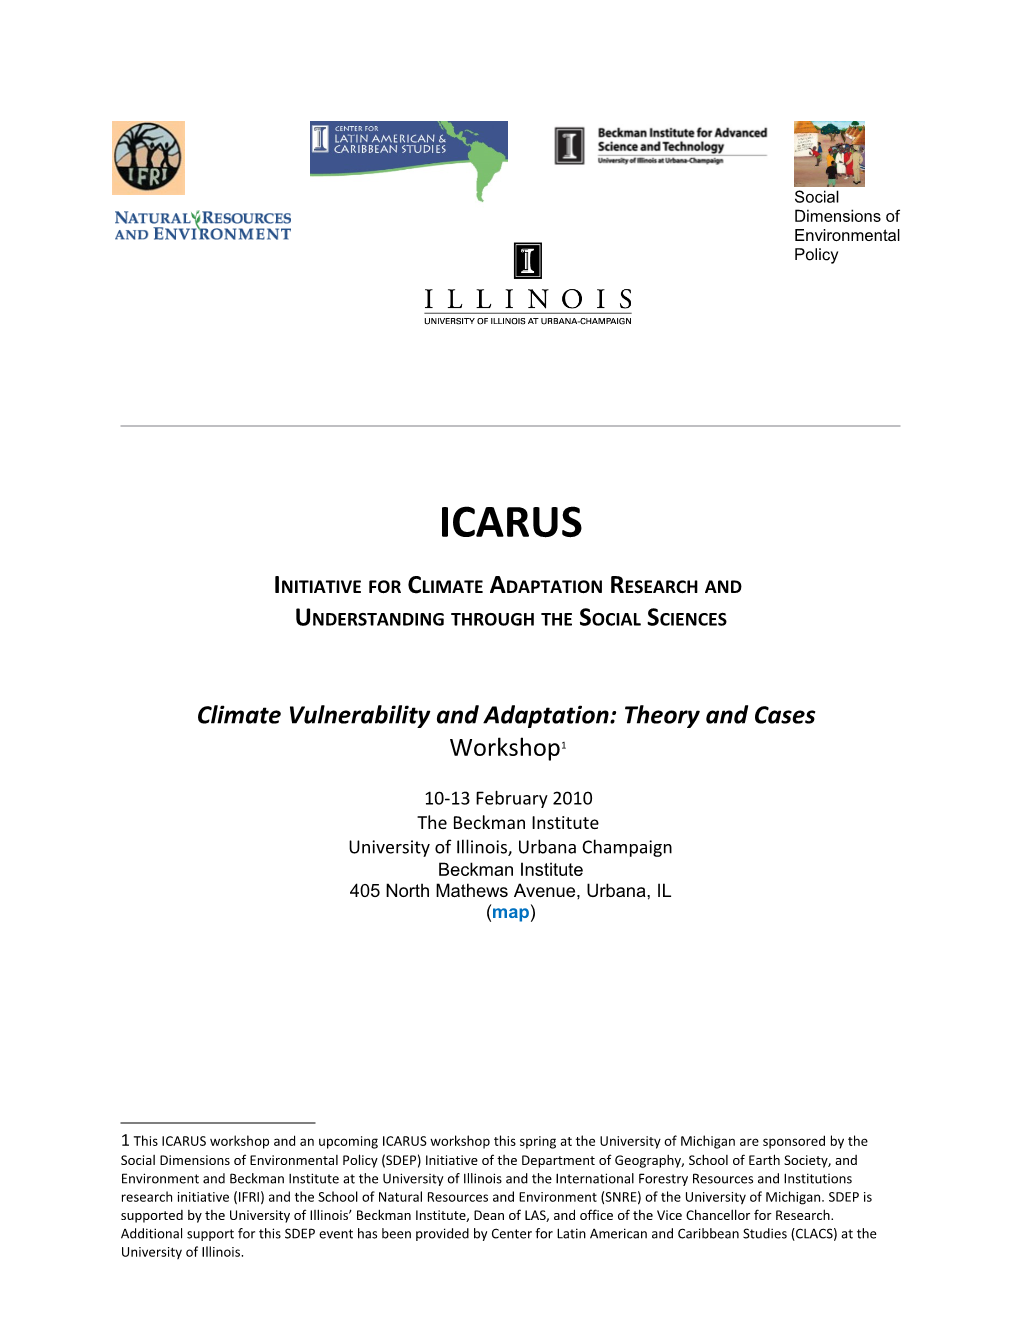 Initiative for Climate Adaptation Research And